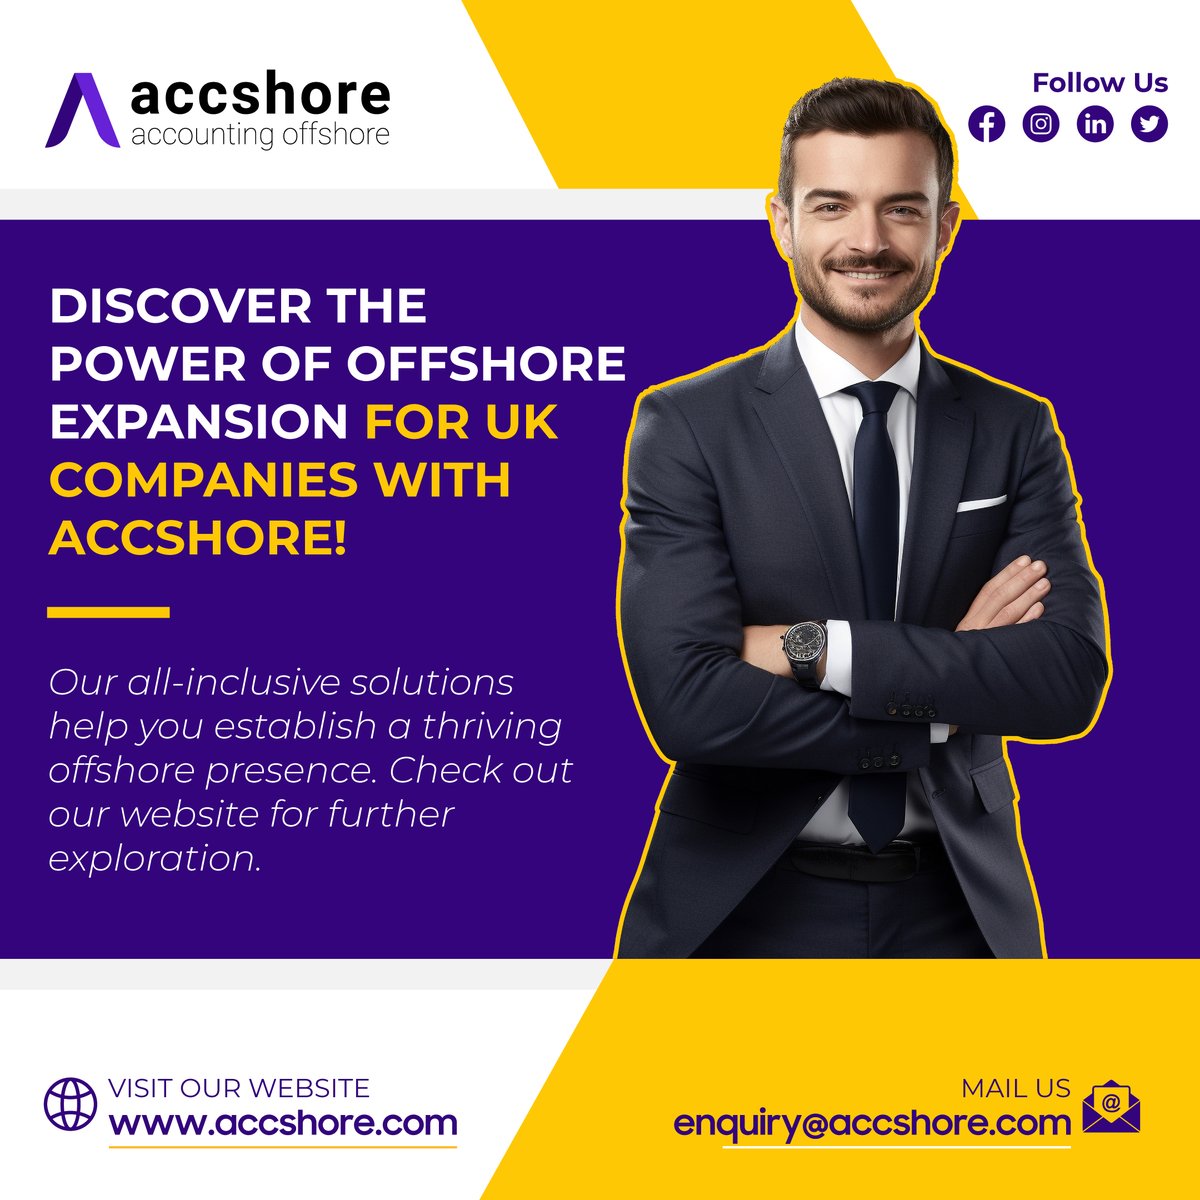 Accshore unlocks the potential of setting up offshore units for UK companies.

Visit our website: accshore.com

#offshore #offshoreunit #offshorecompany #offshorebusiness #offshorestrategy #offshoreinvestment #offshoreconsulting #ukcompanies #HimachalPradesh #OMG2 #UK